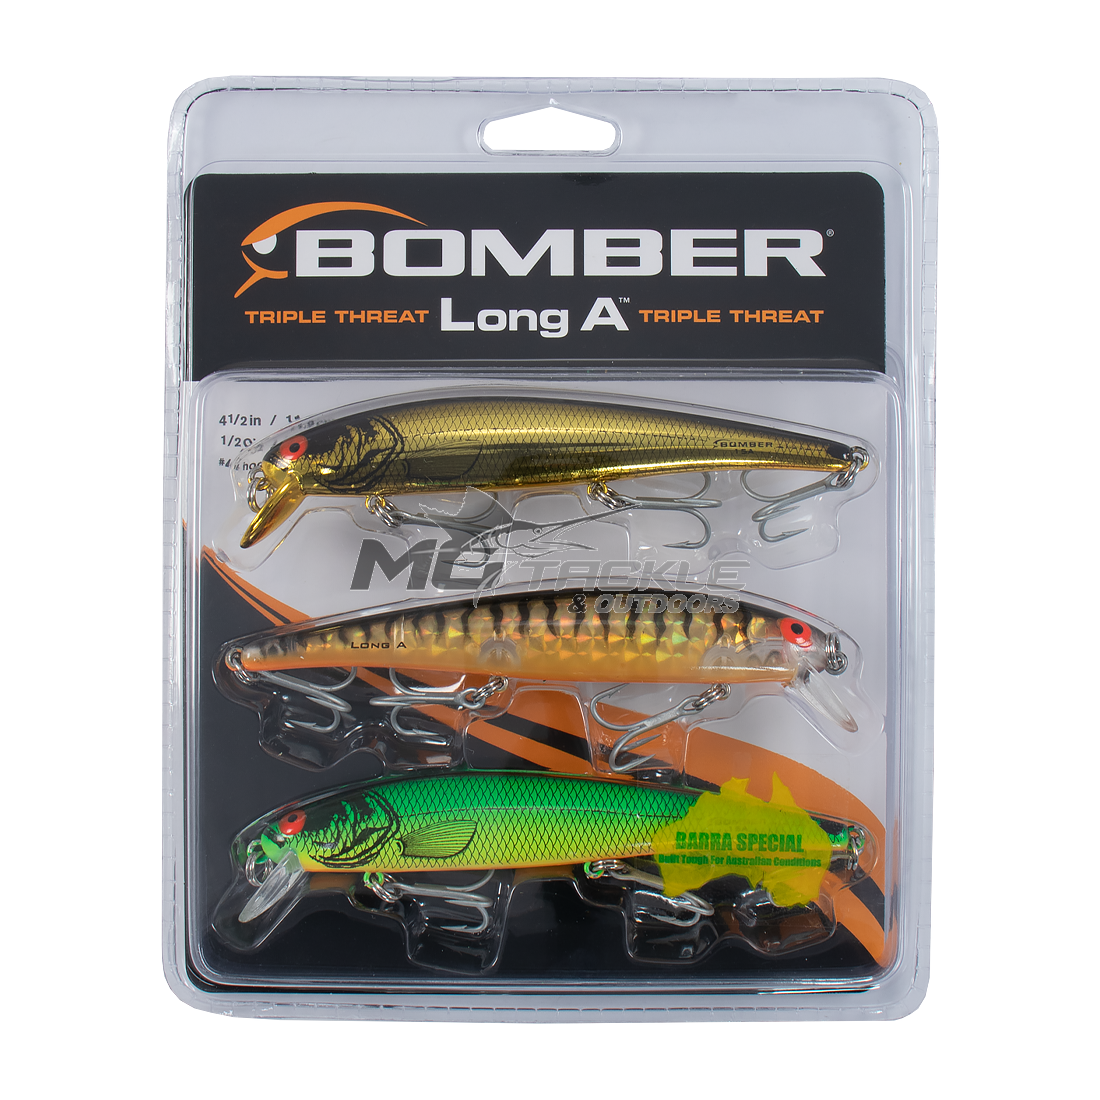 Bomber Triple Threat Long A Lure Pack | MoTackle & Outdoors